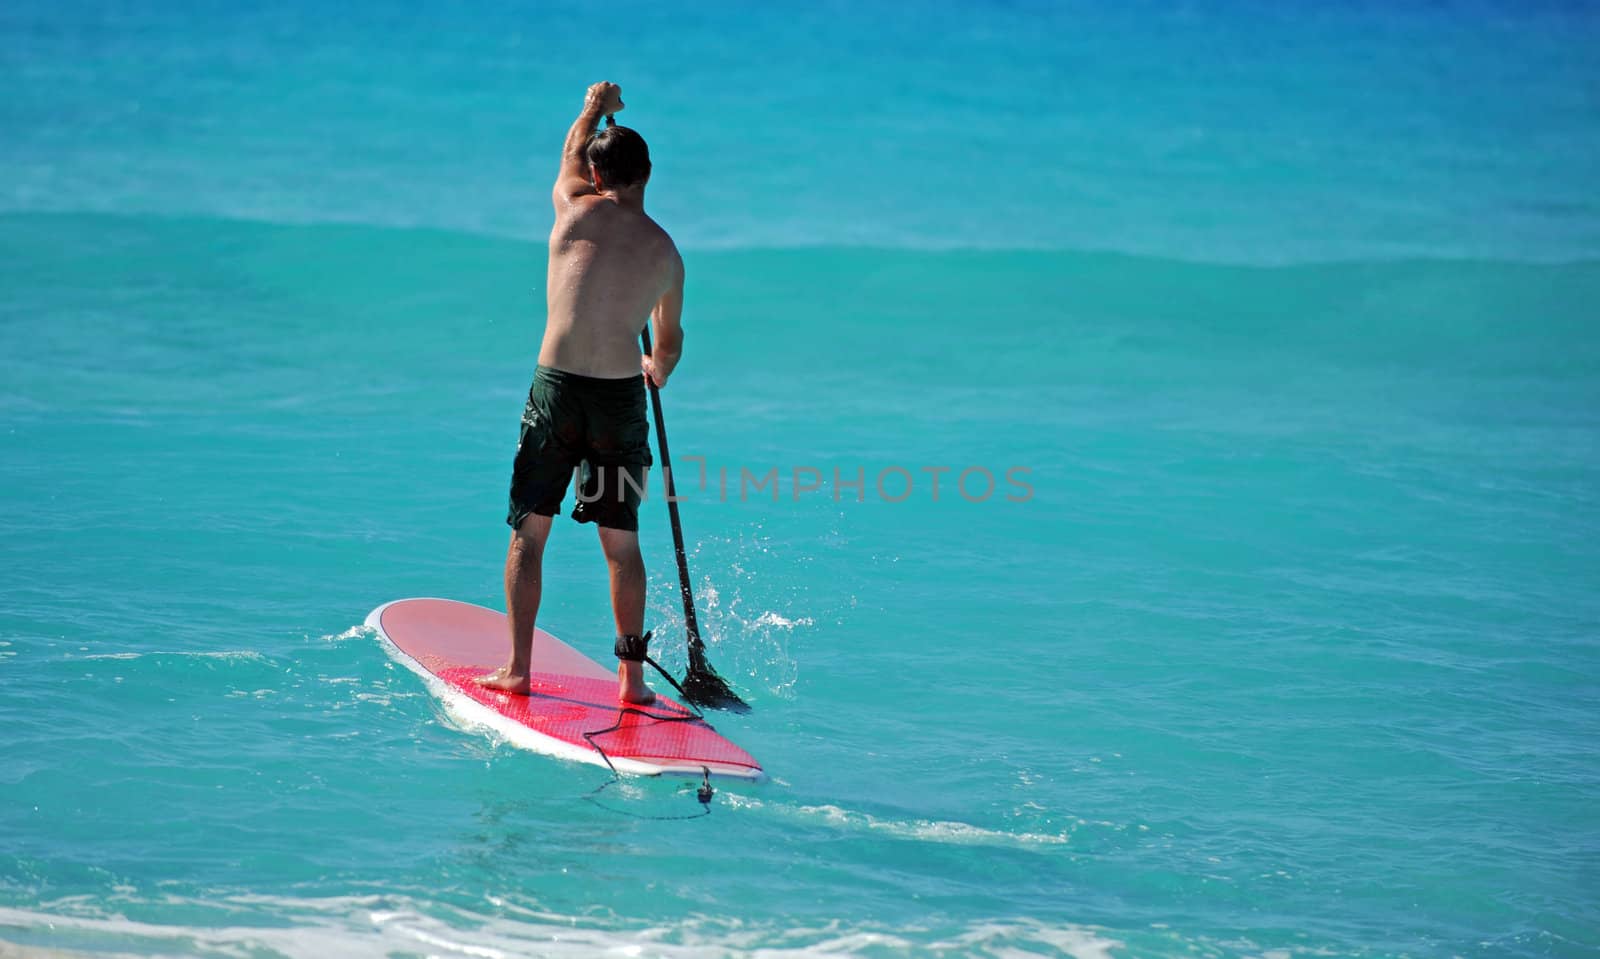 Man paddling out on paddle board by ftlaudgirl